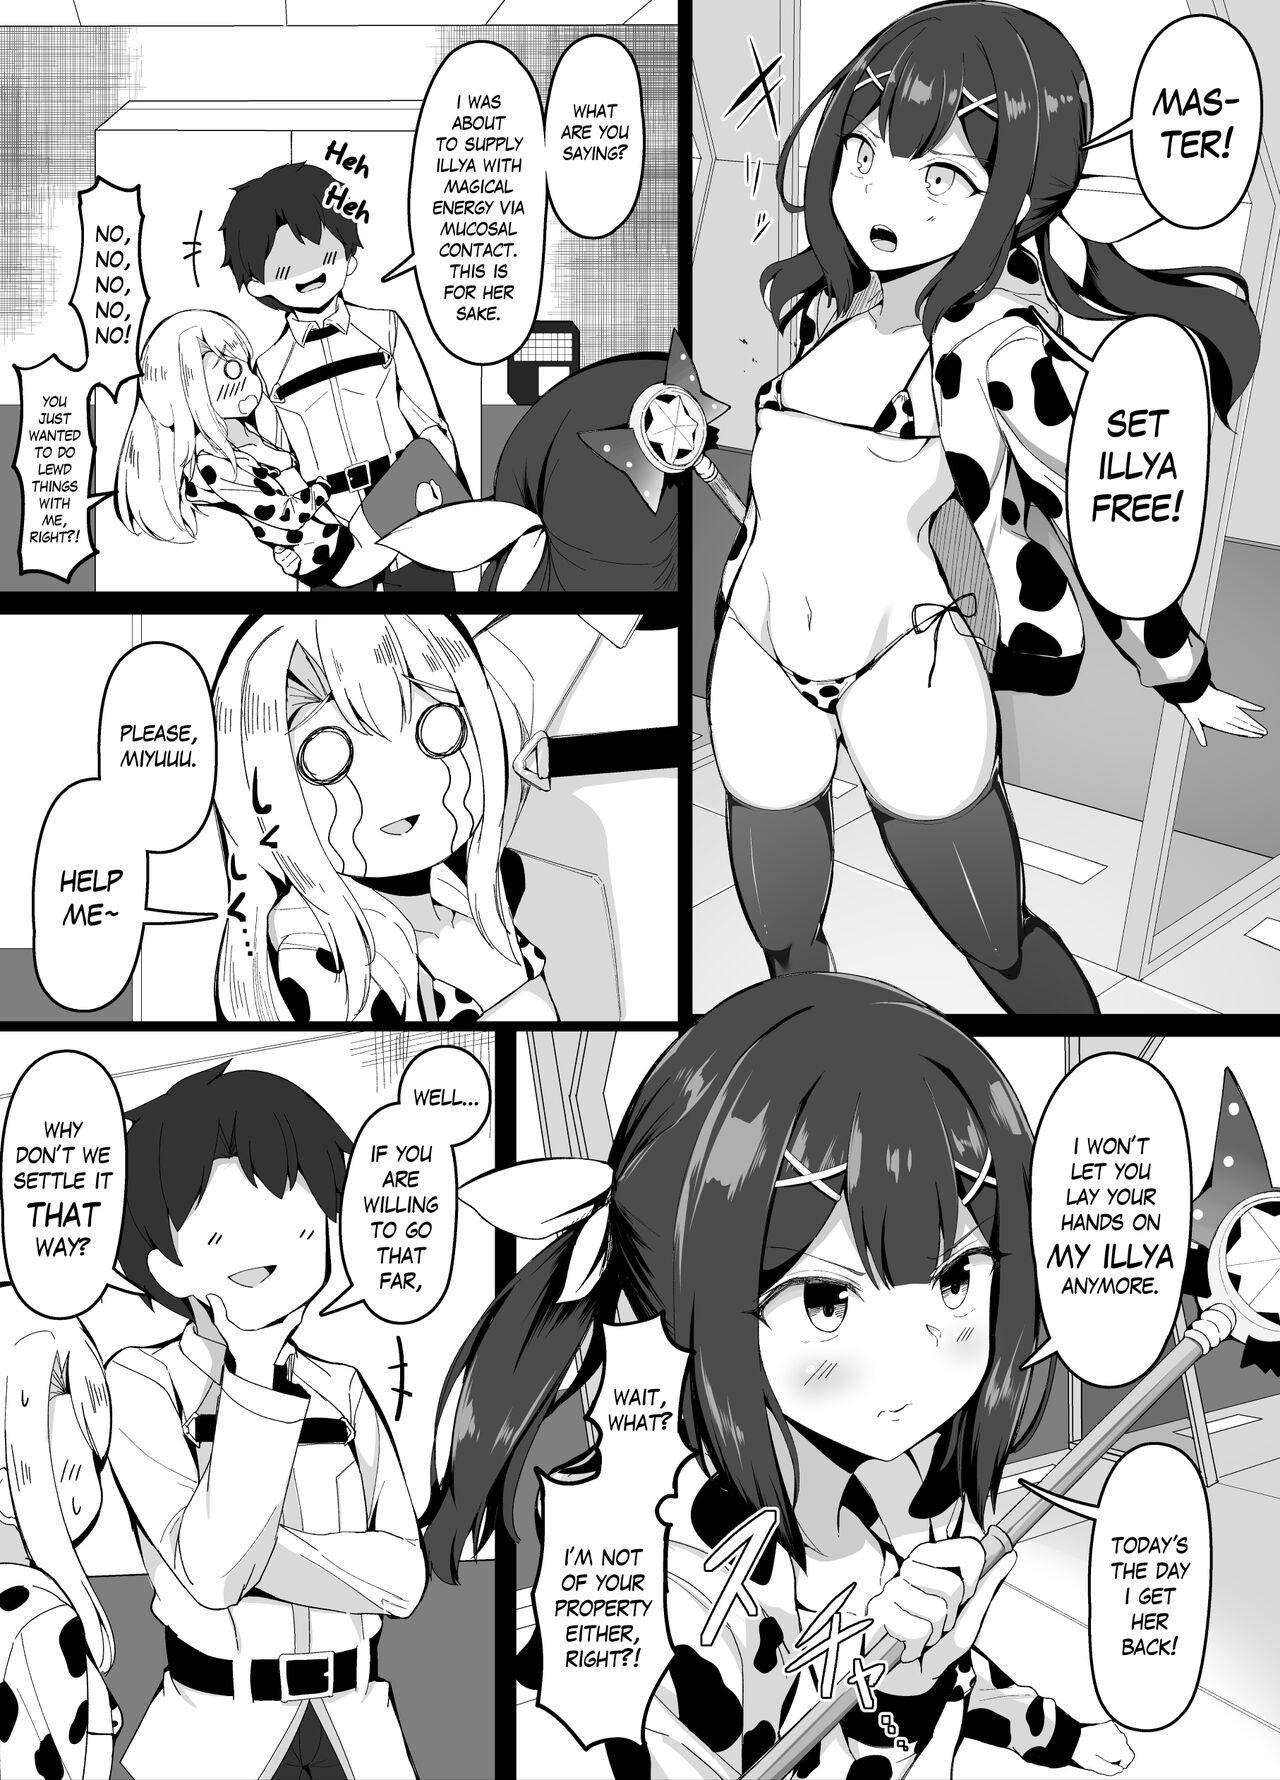 Oppai ni Makete Shimau Master | Master can't win against boobs 0